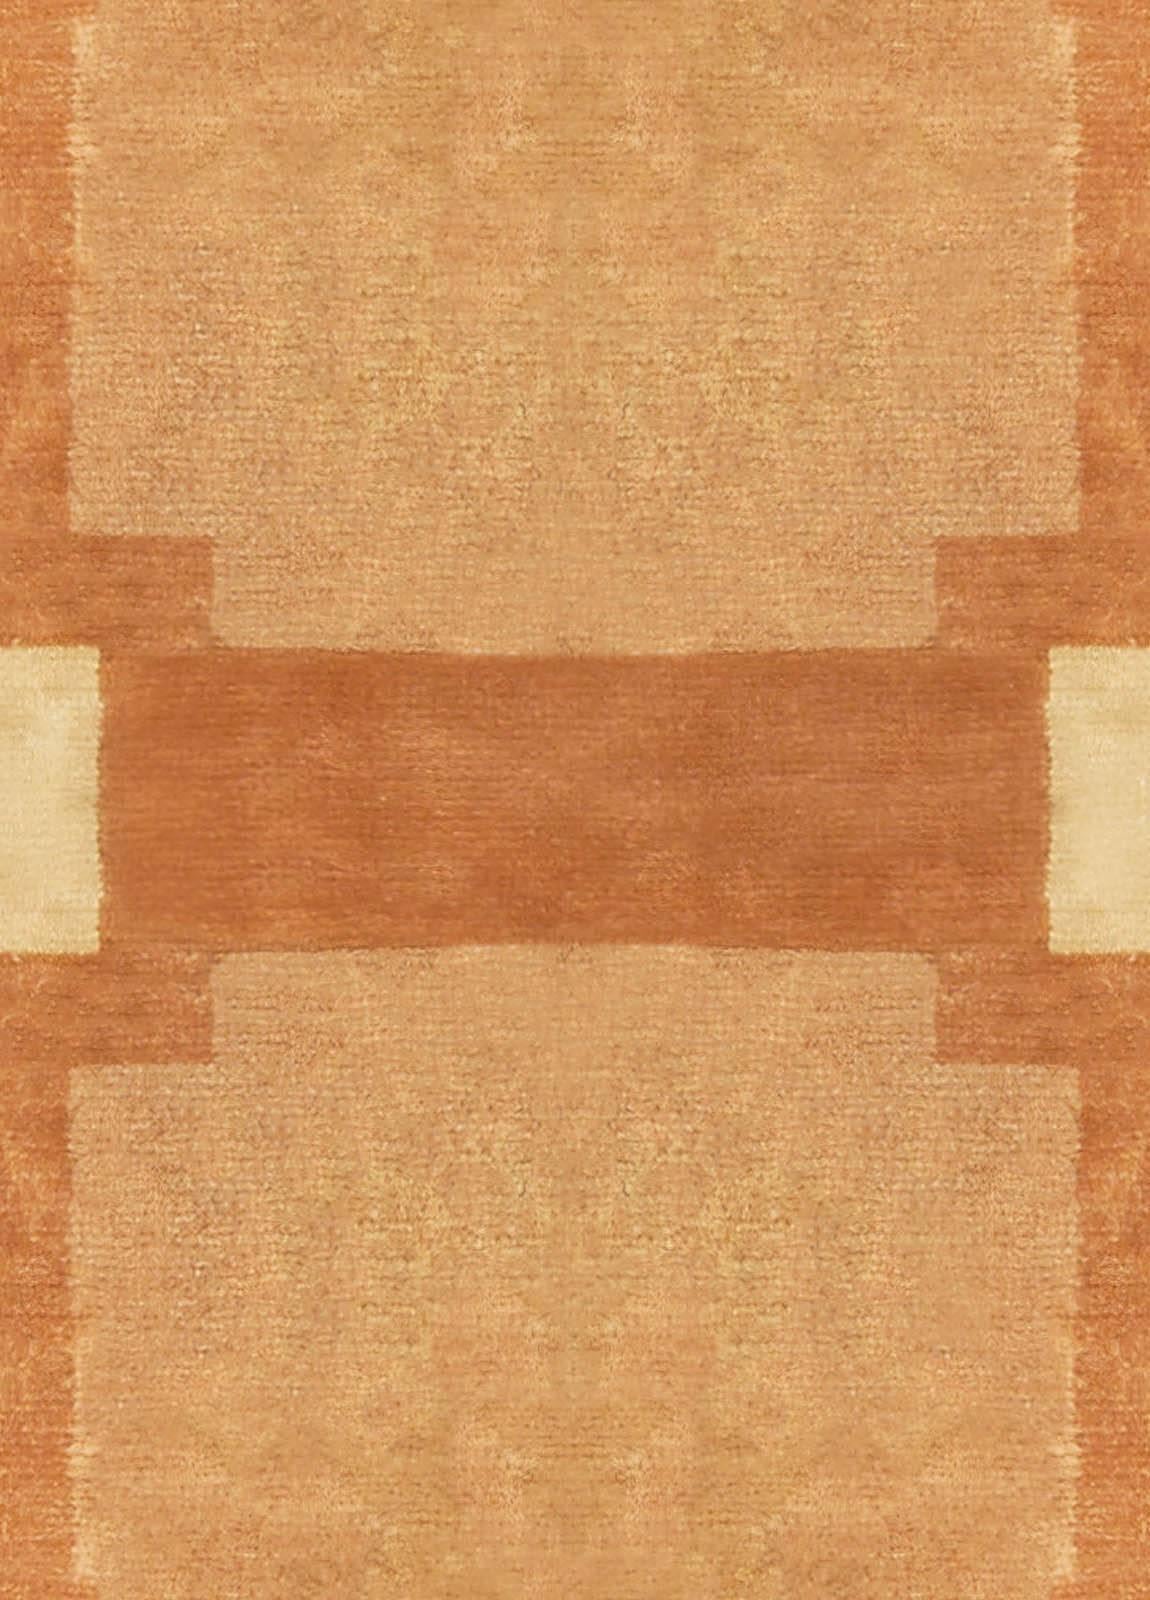 A French deco rug with a mirrored geometric design of color blocked shades of orange that are graphically intersected with brown, black and ivory.